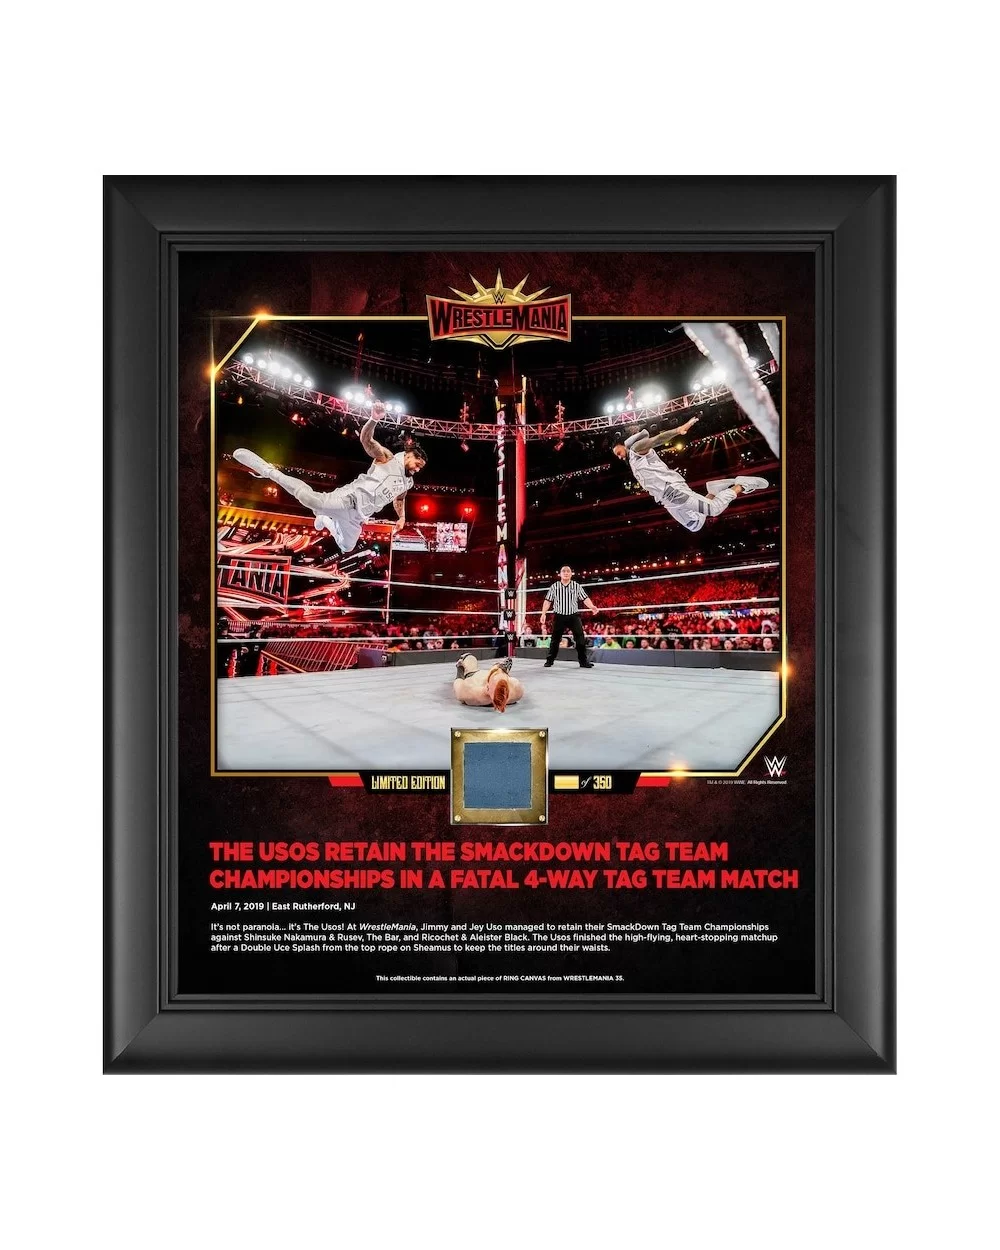 The Usos WWE Framed 15" x 17" WrestleMania 35 Collage with a Piece of Match-Used Canvas - Limited Edition of 350 $21.28 Colle...